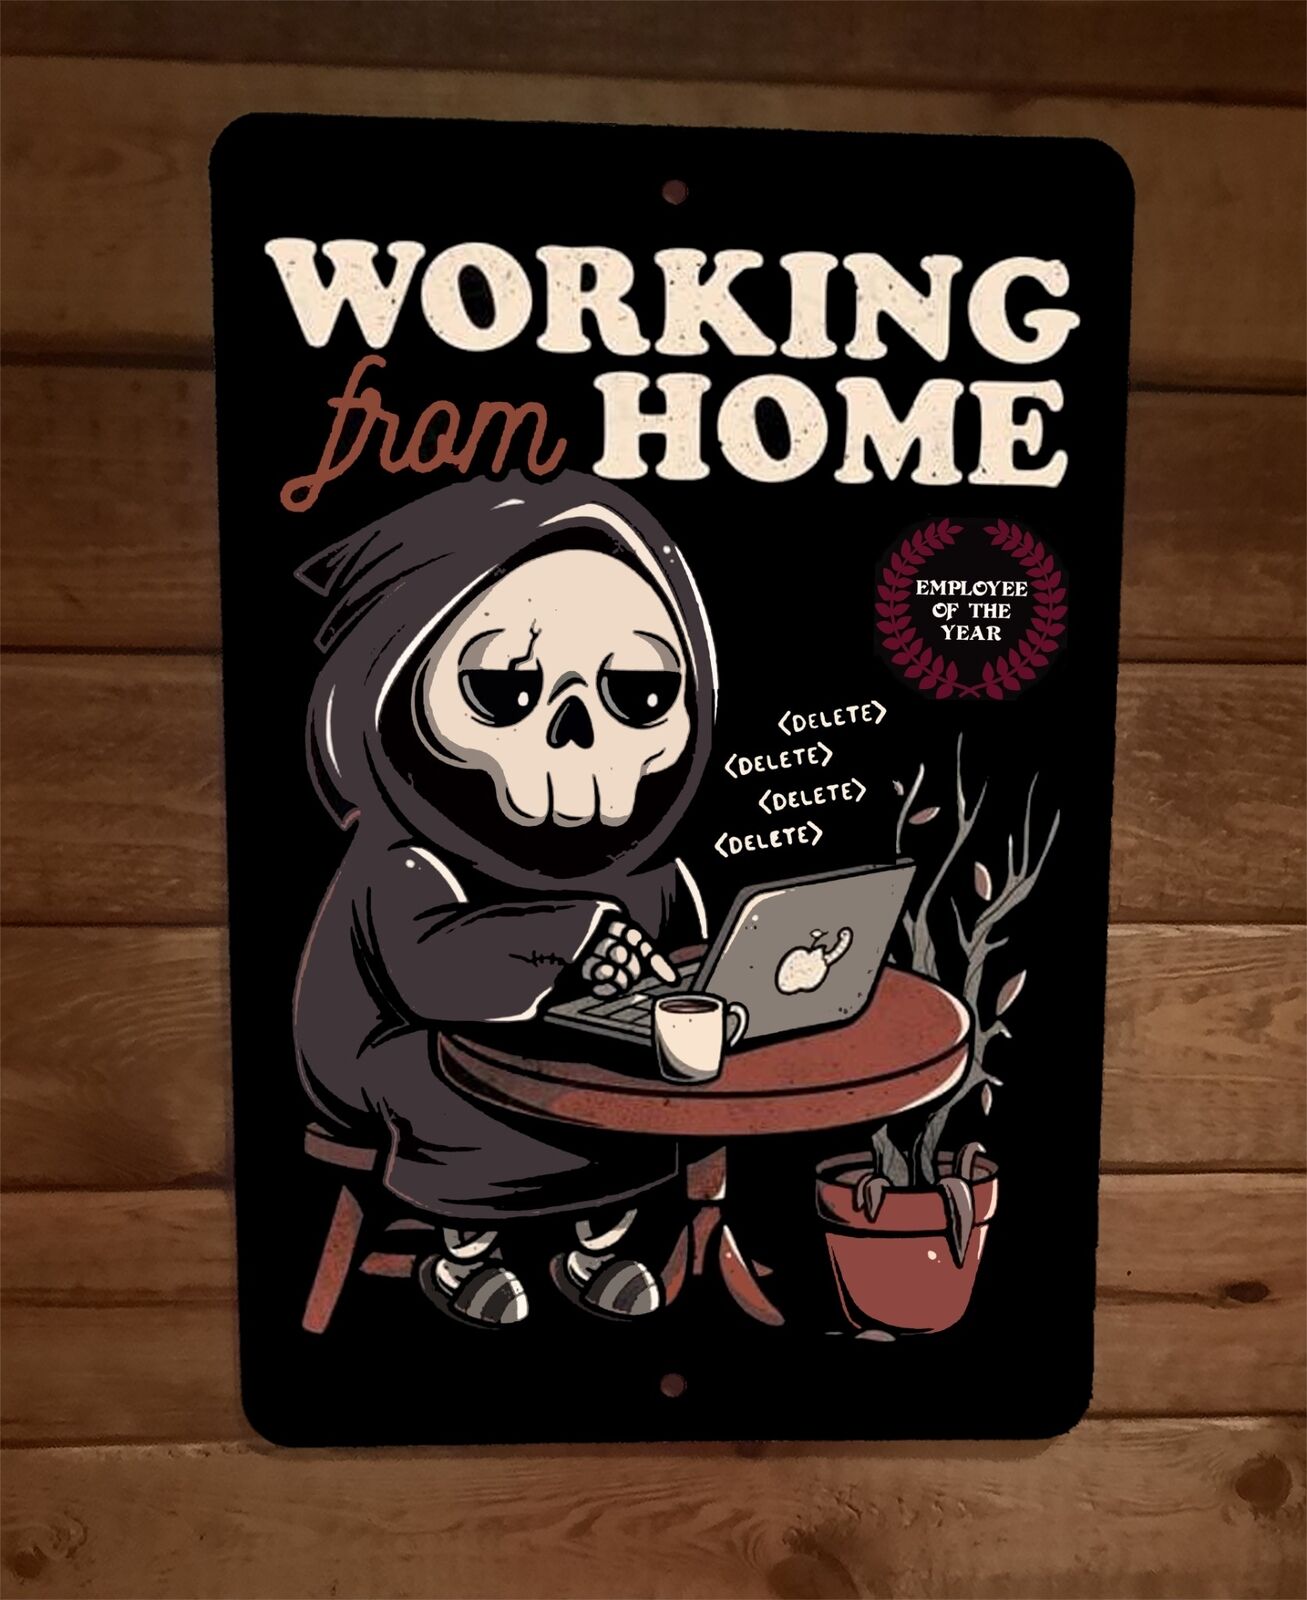 Working From Home Employee of the Year 8x12 Metal Wall Sign